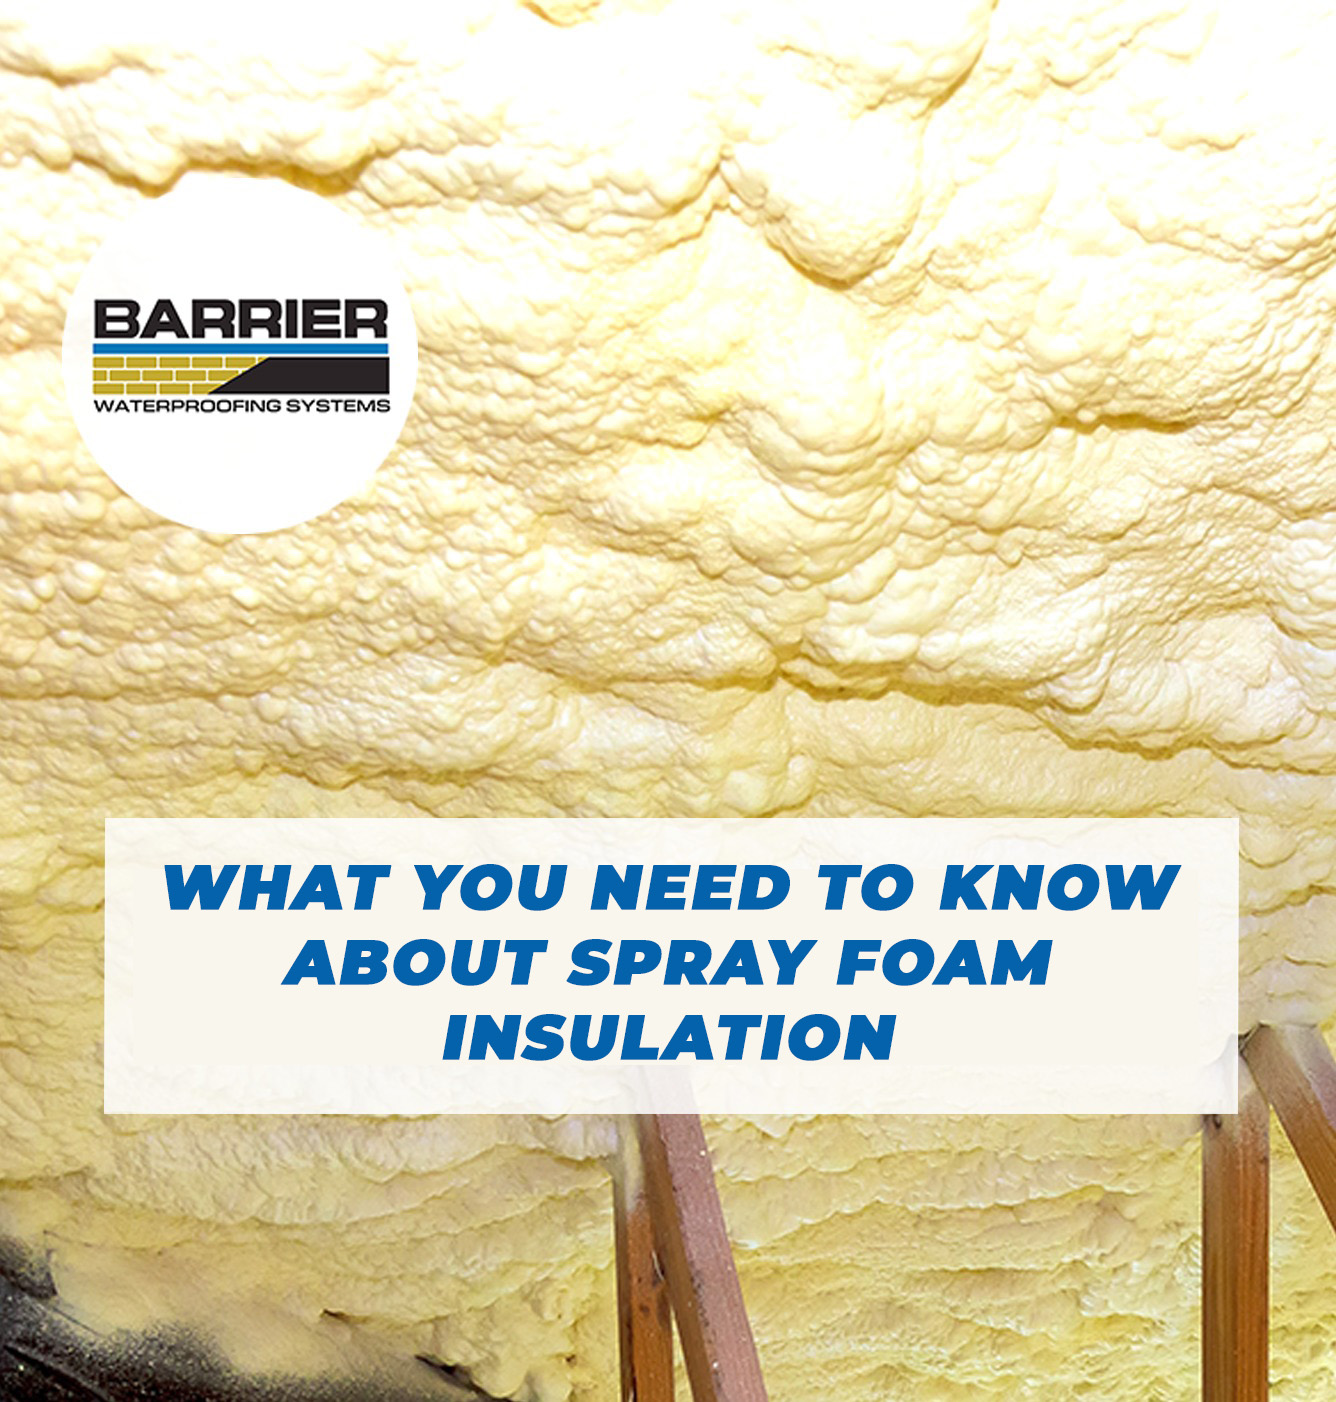 Photo of spray foam insulation in crawl space local services